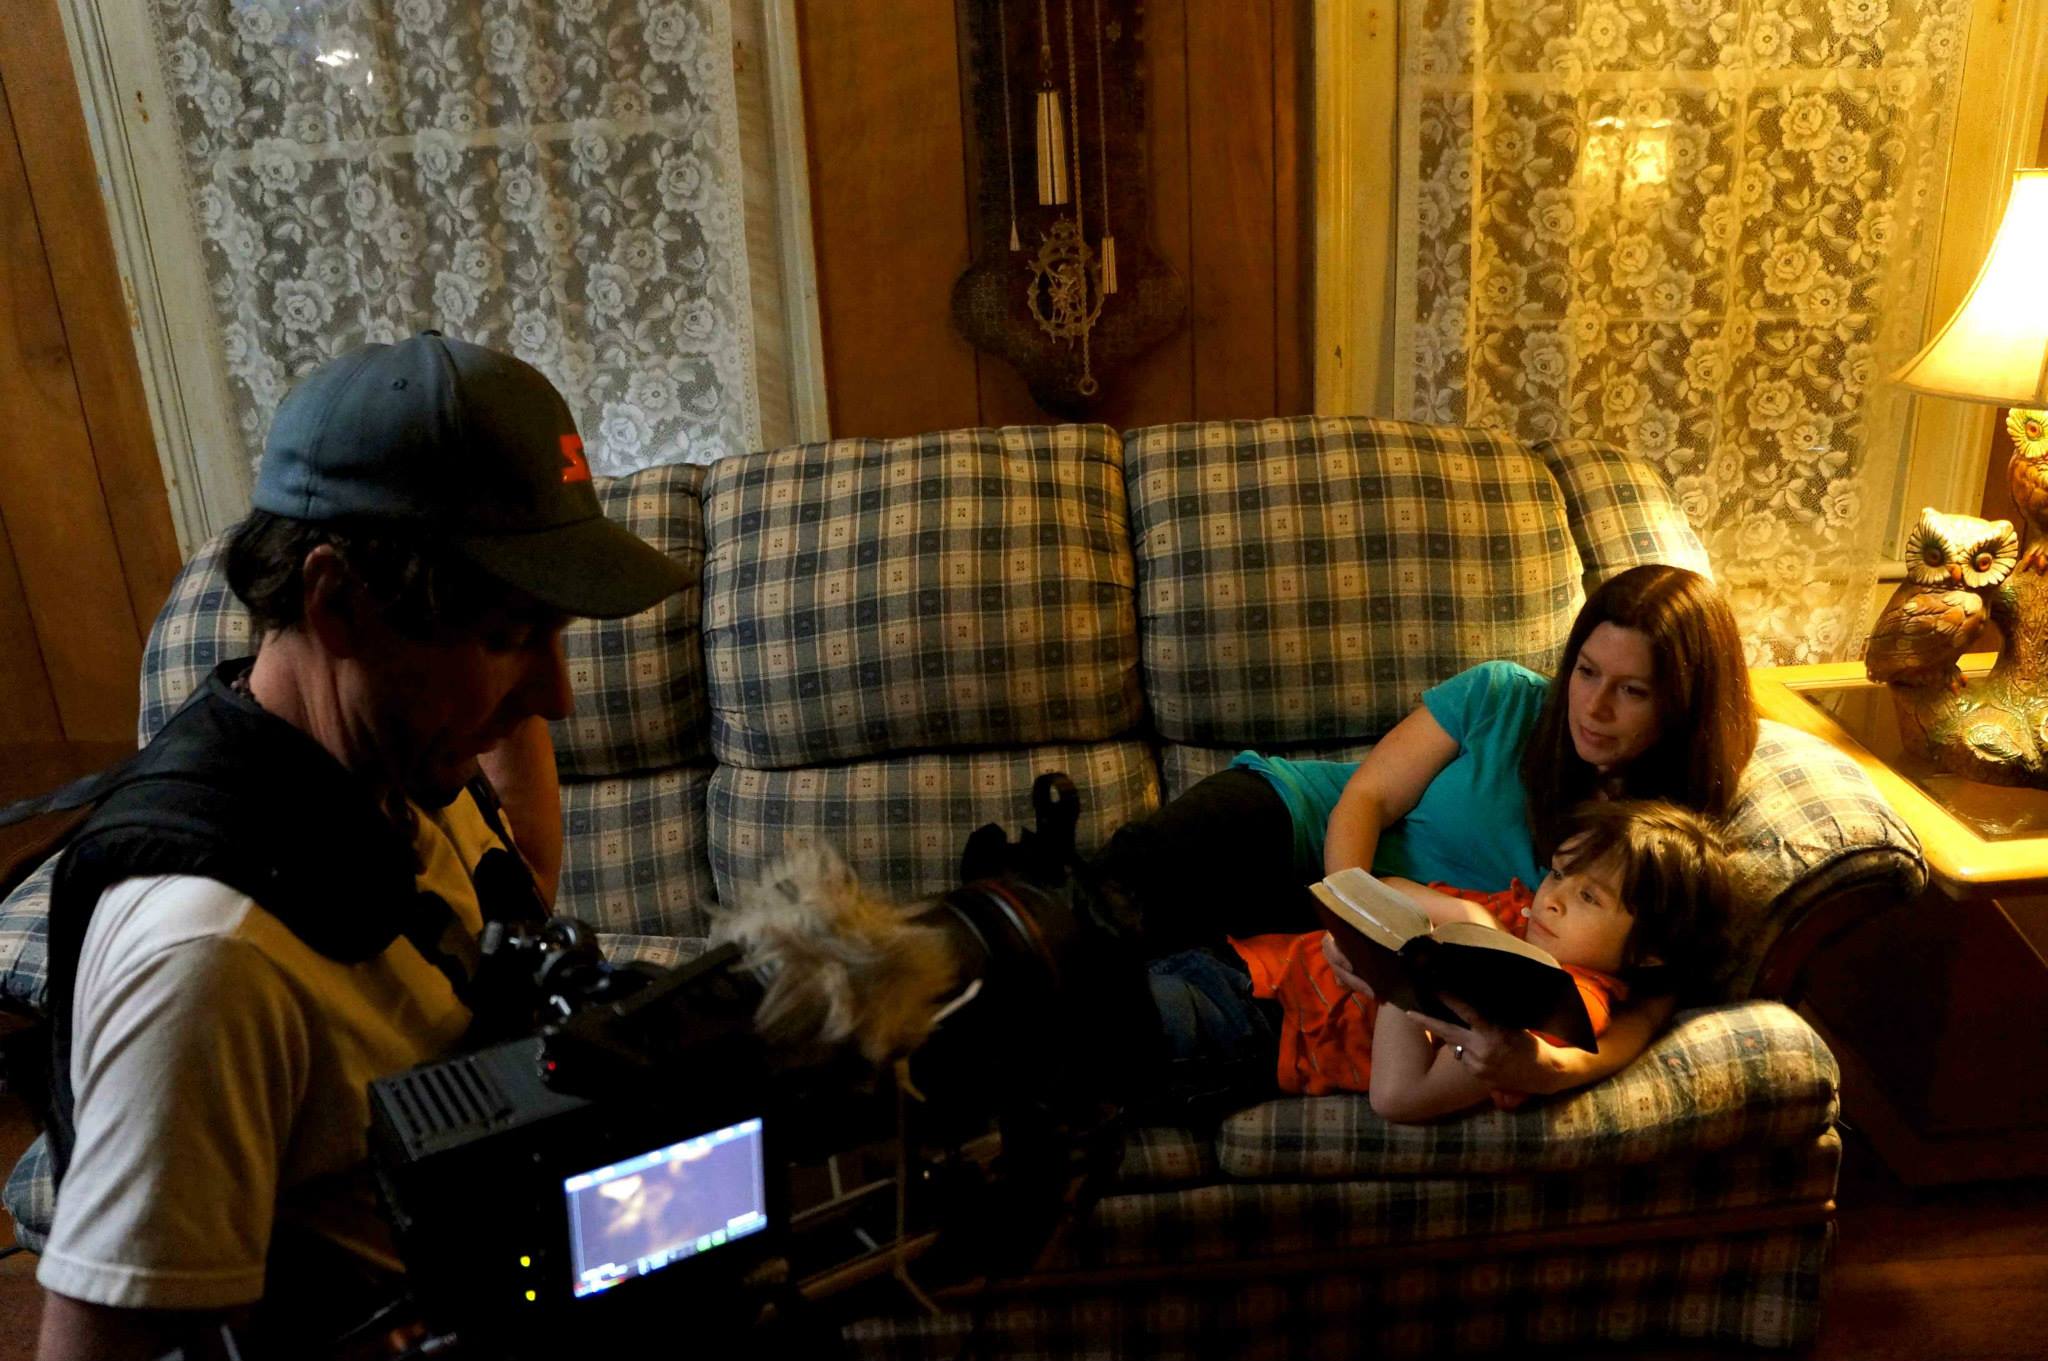 Heather Fairbanks as 'Mary' and Walker Fairbanks as 'Young Nathan' pictured with Director Ryan Davy in The Parricidal Effect